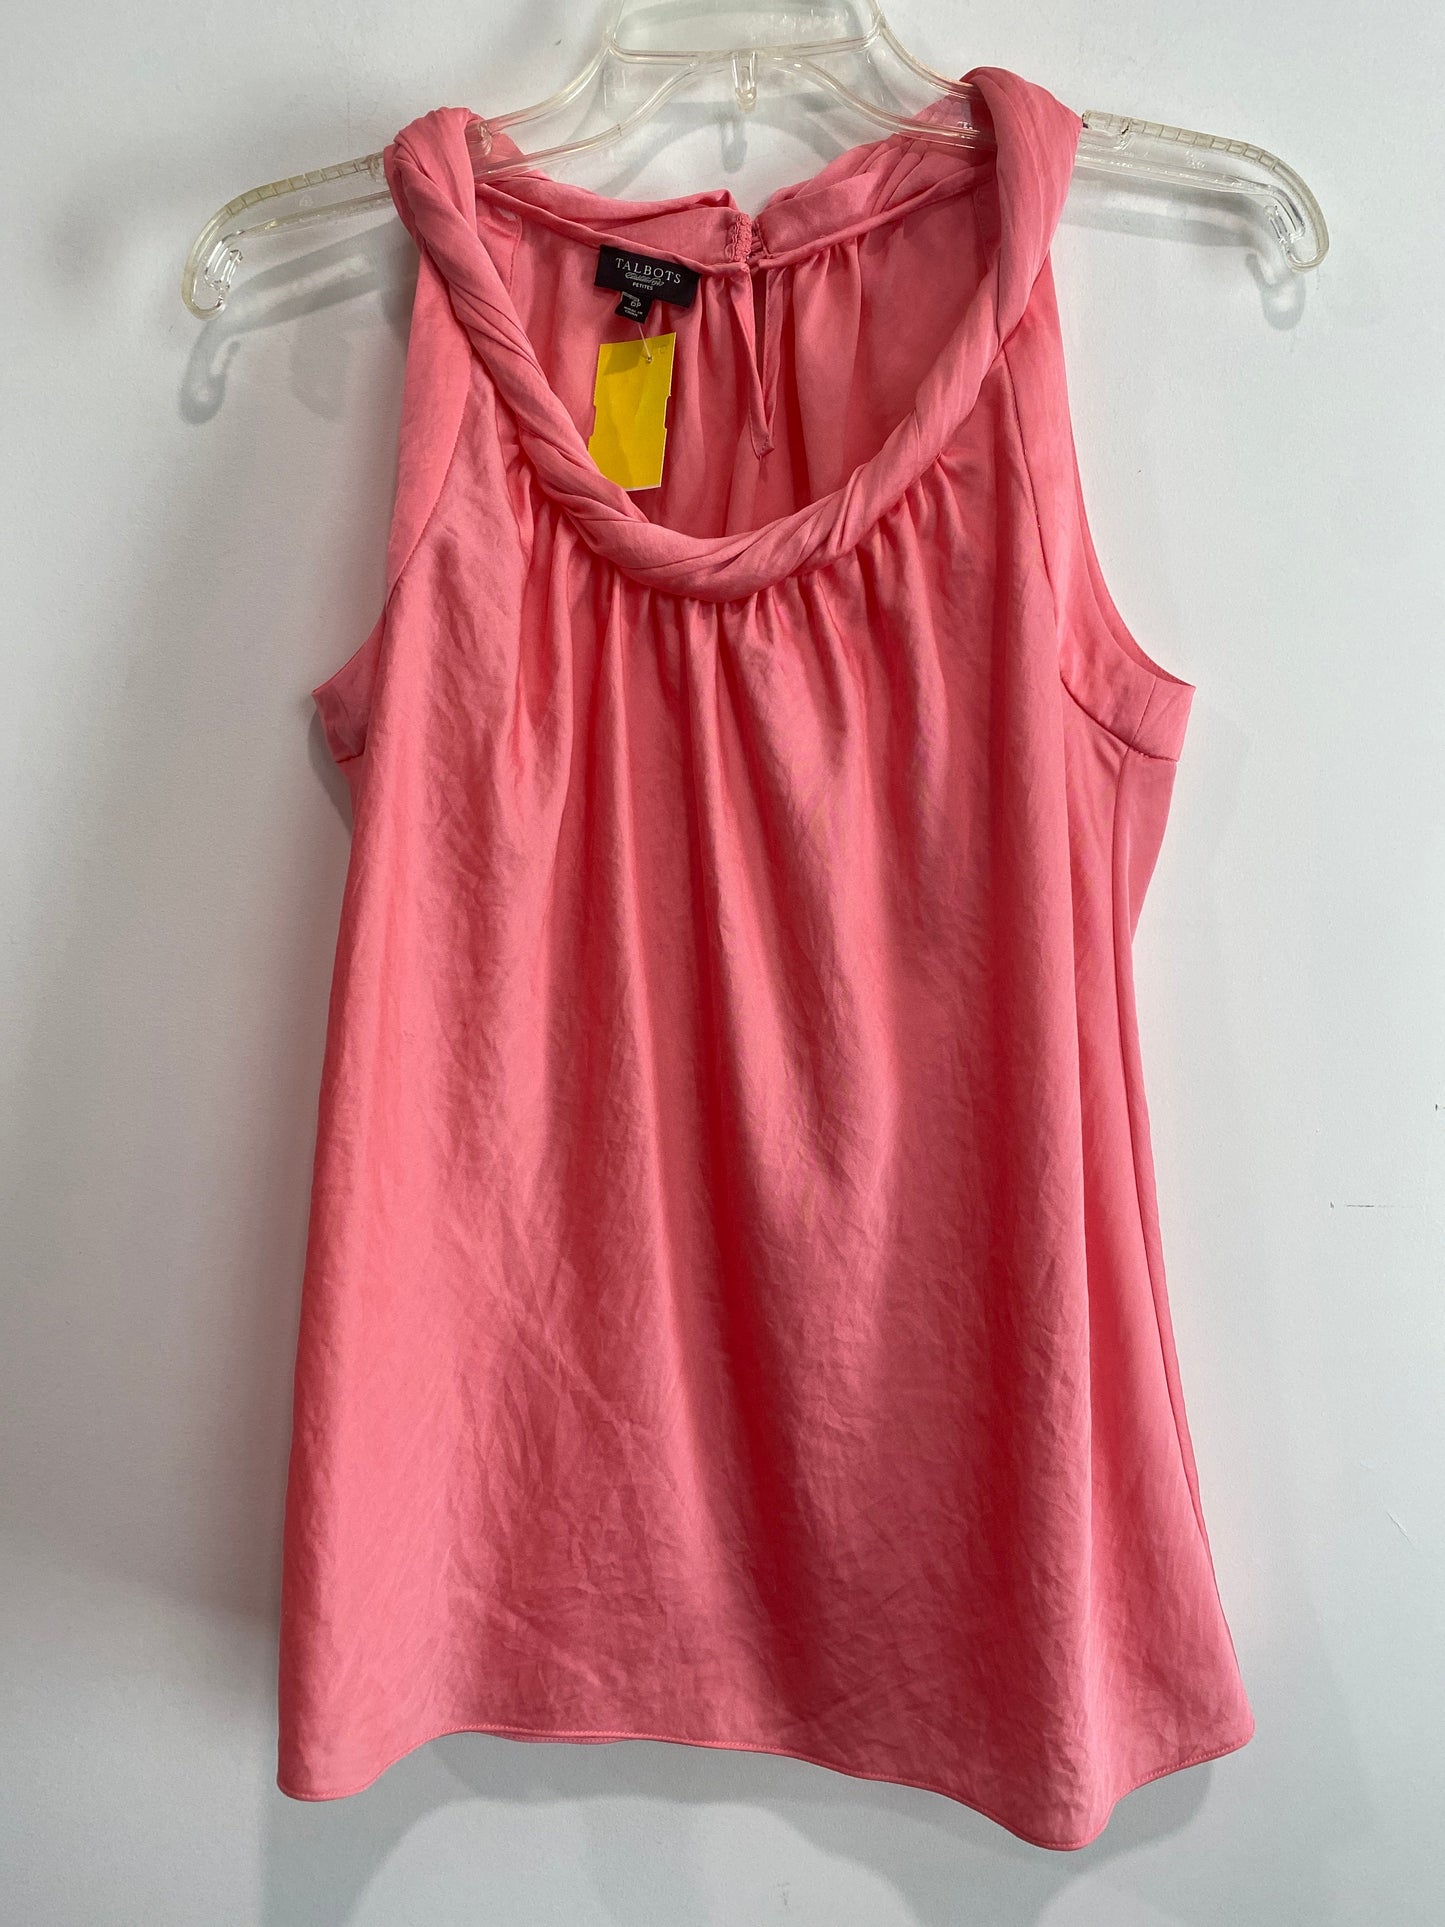 Top Sleeveless By Talbots  Size: 6petite